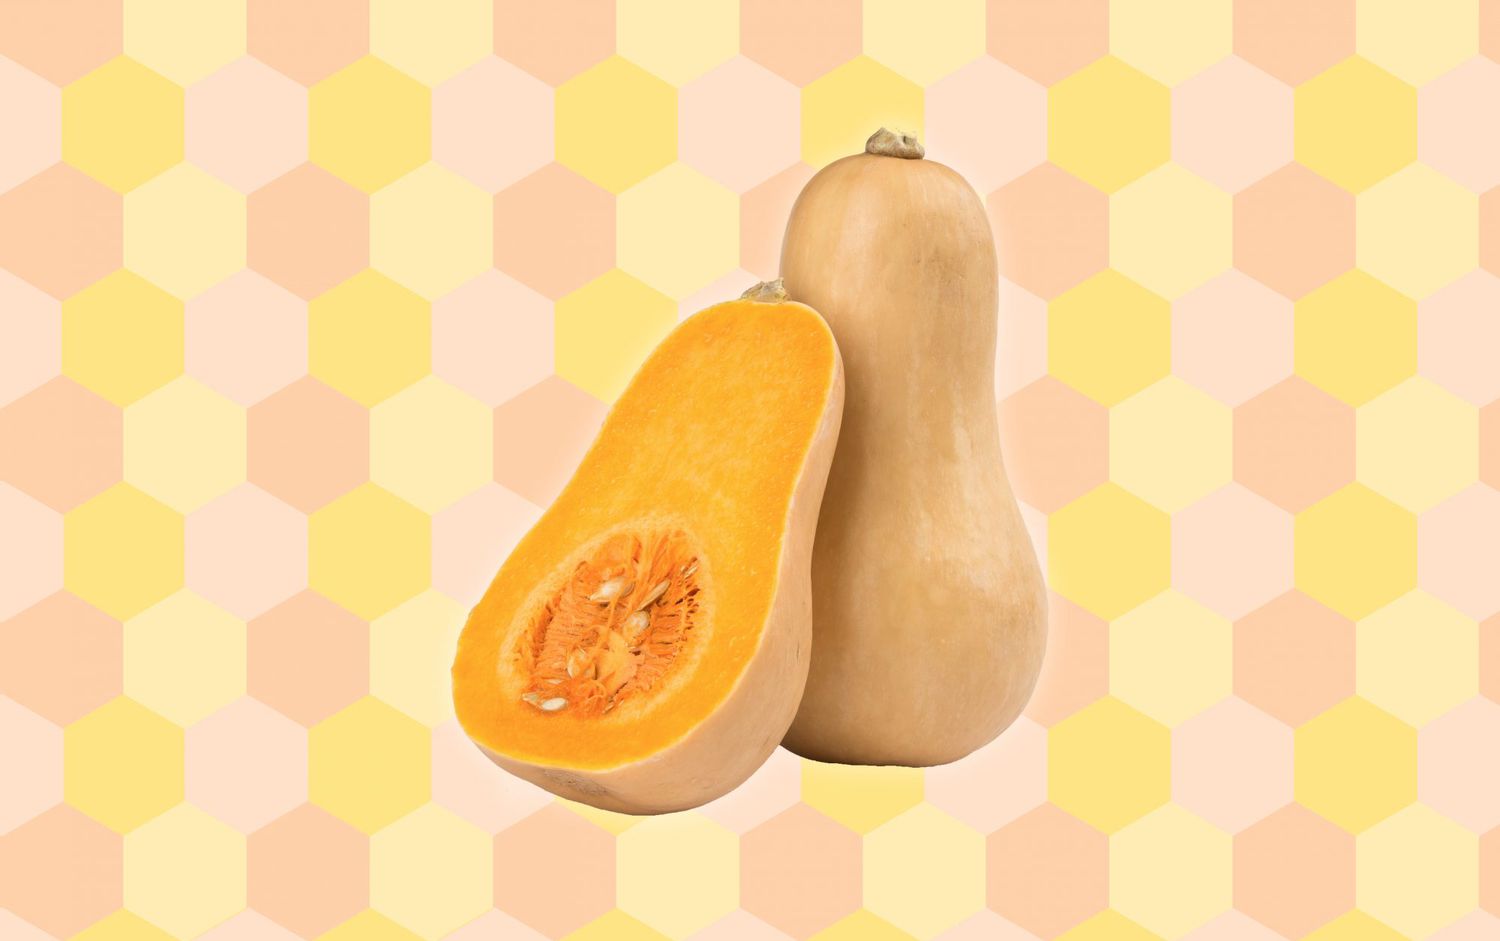 butternut squash on patterned background